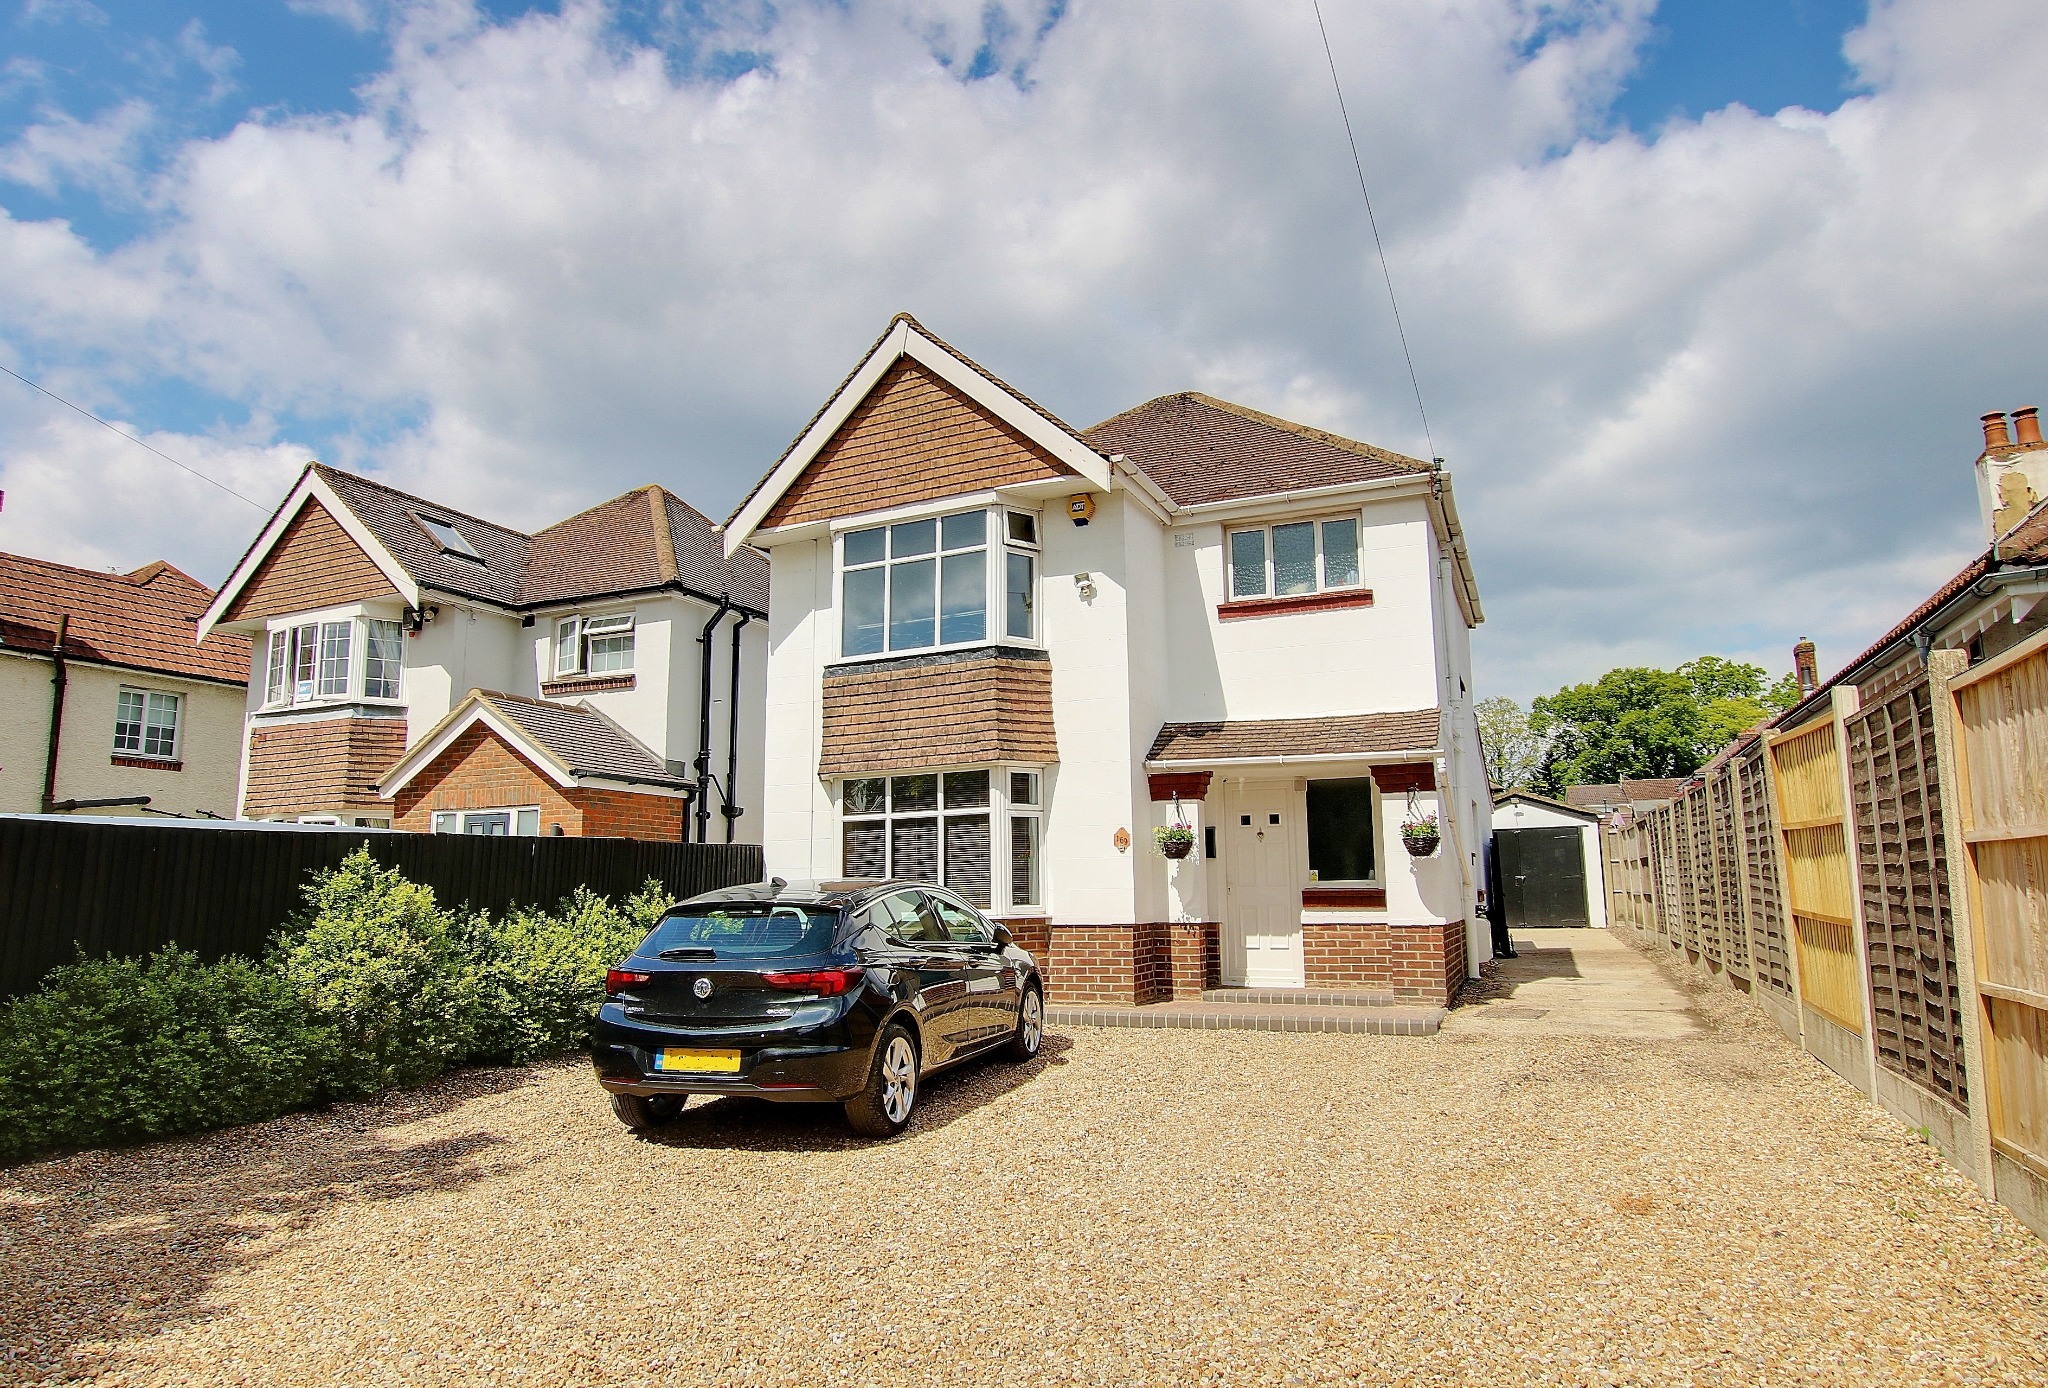 GUIDE PRICE £350,000 - £375,000! NO CHAIN! EXTENDED! EXTENSIVE DRIVEWAY!